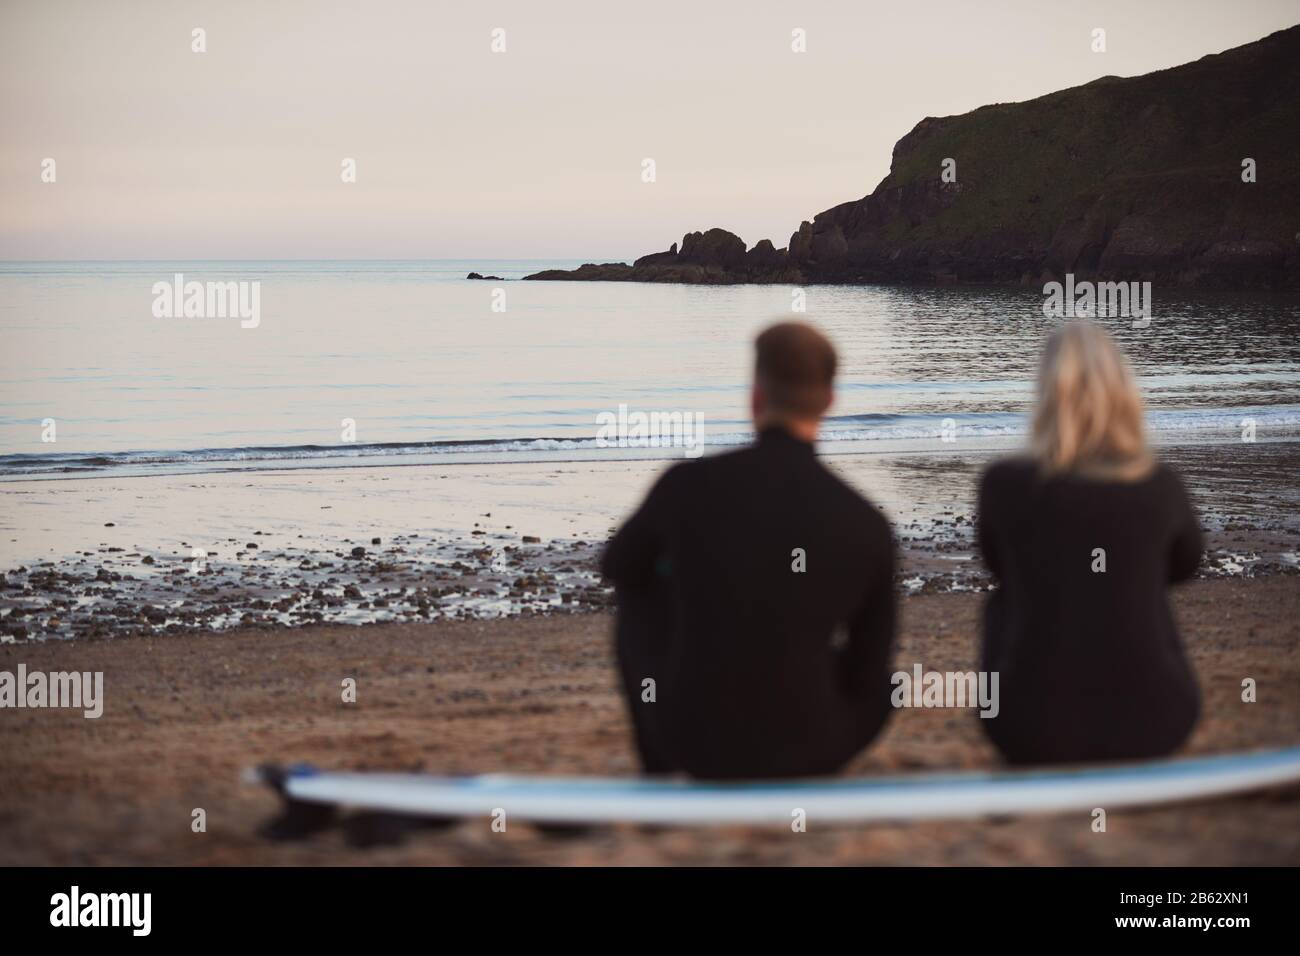 Defocused Shot Of Couple In Wetsuits On Surfing Staycation Sitting On Surfboard Looking Out To  Sea Stock Photo